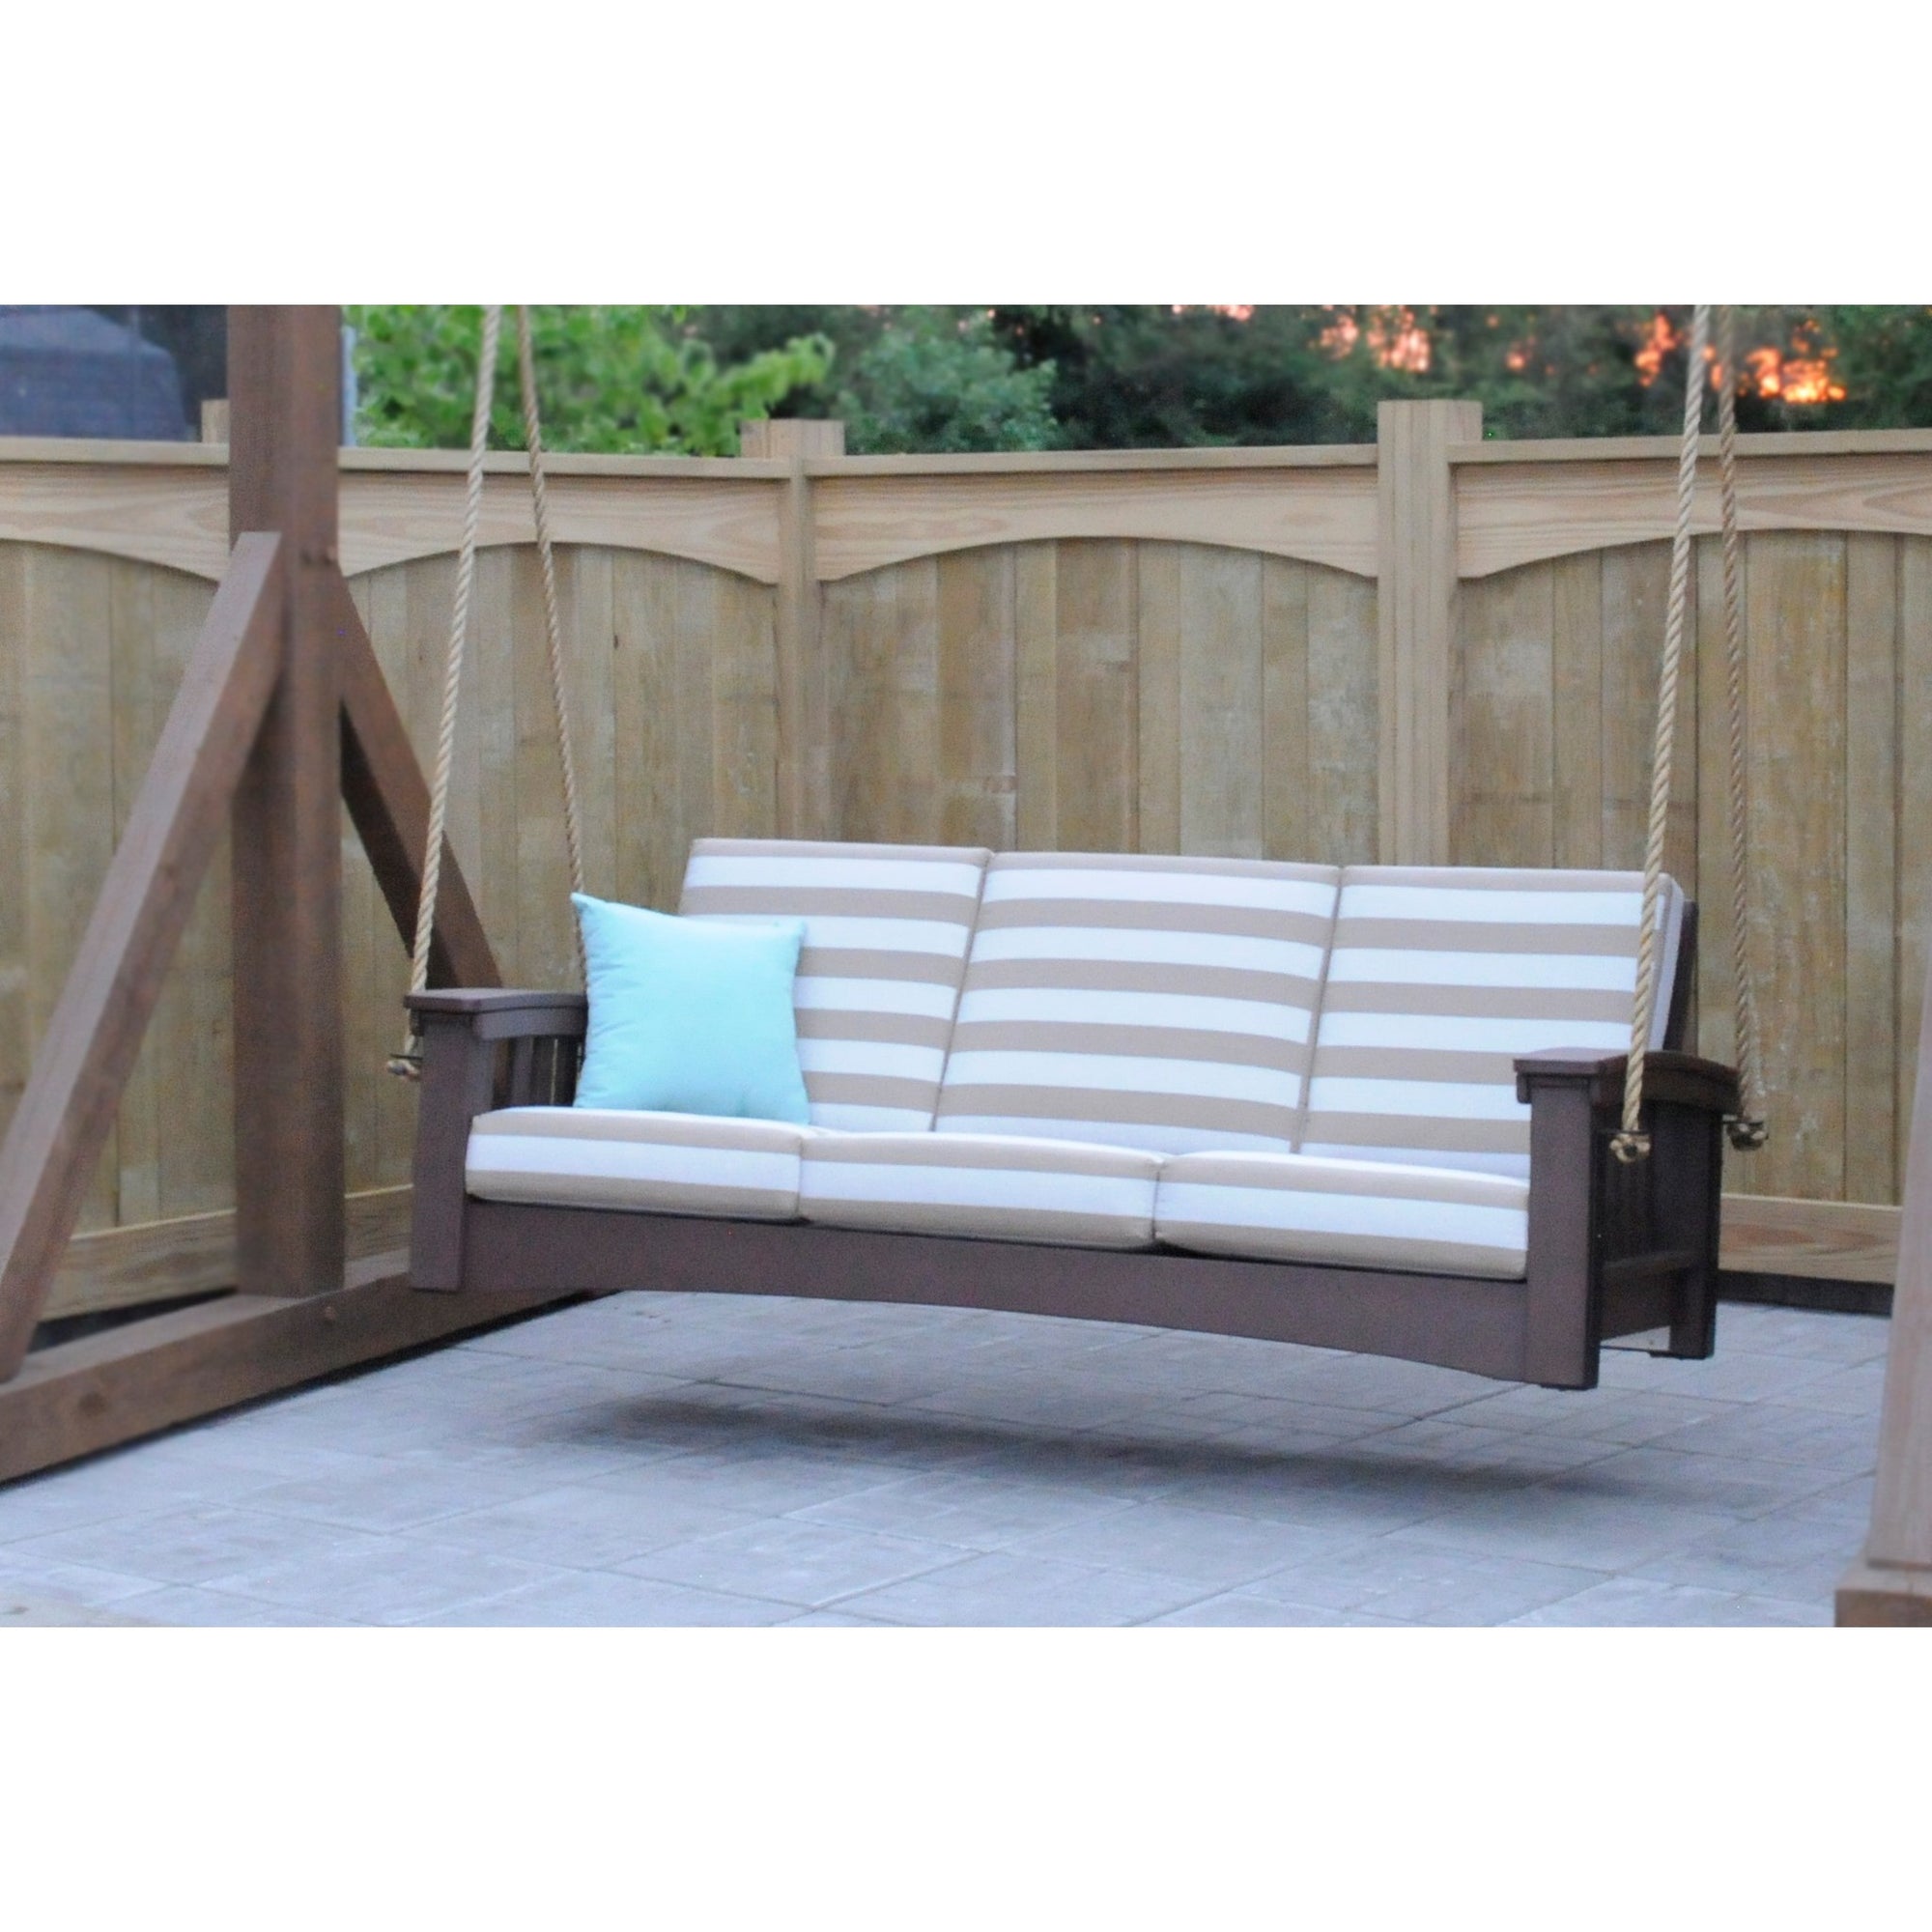 Hershyway Mission Sofa Swing - Swings and More